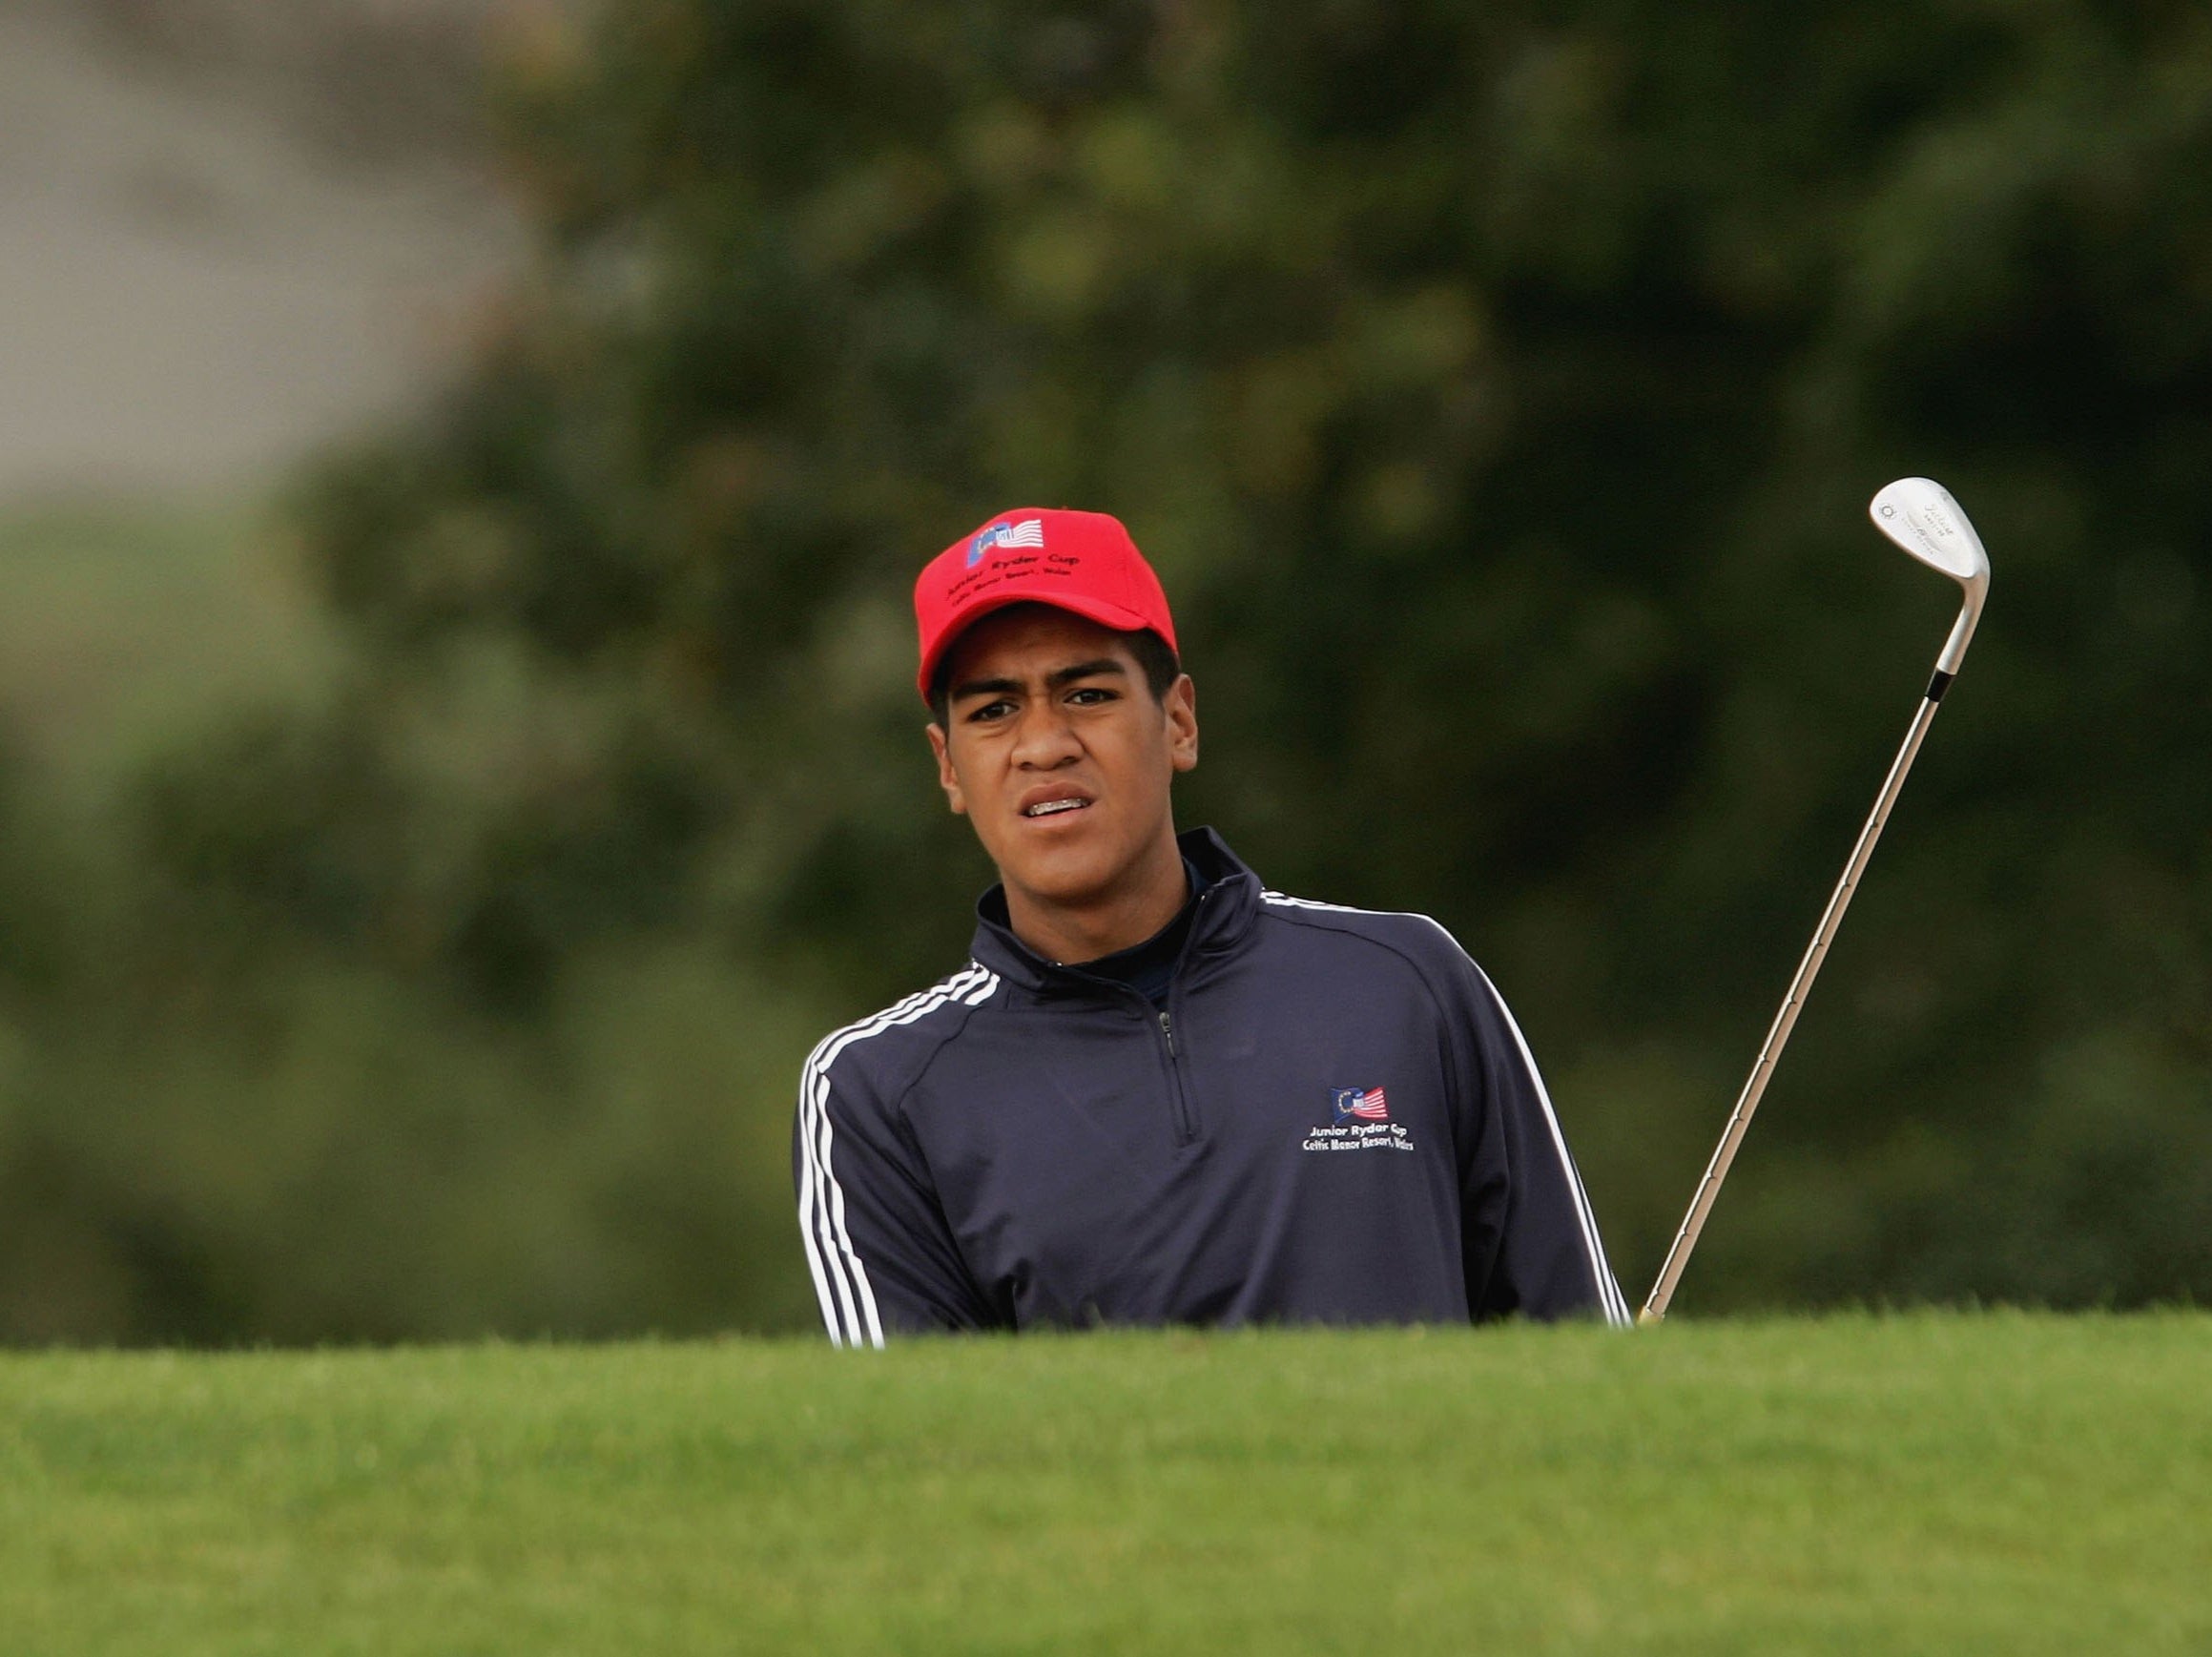 Tony Finau competes at the Junior Ryder Cup